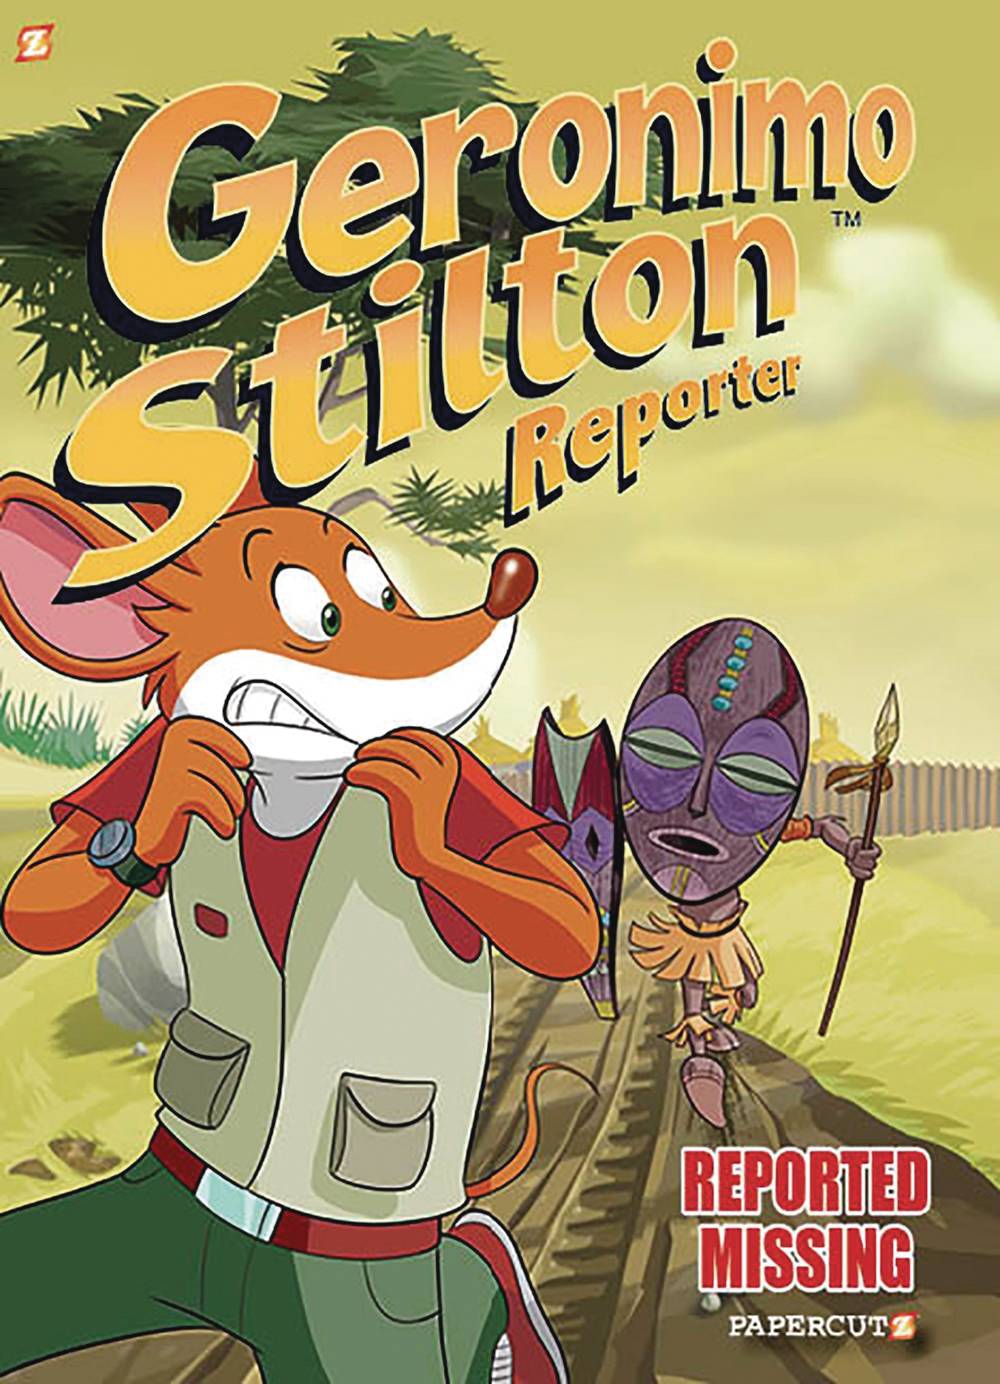 GERONIMO STILTON REPORTER HC VOL 13 REPORTED MISSING (RES) (